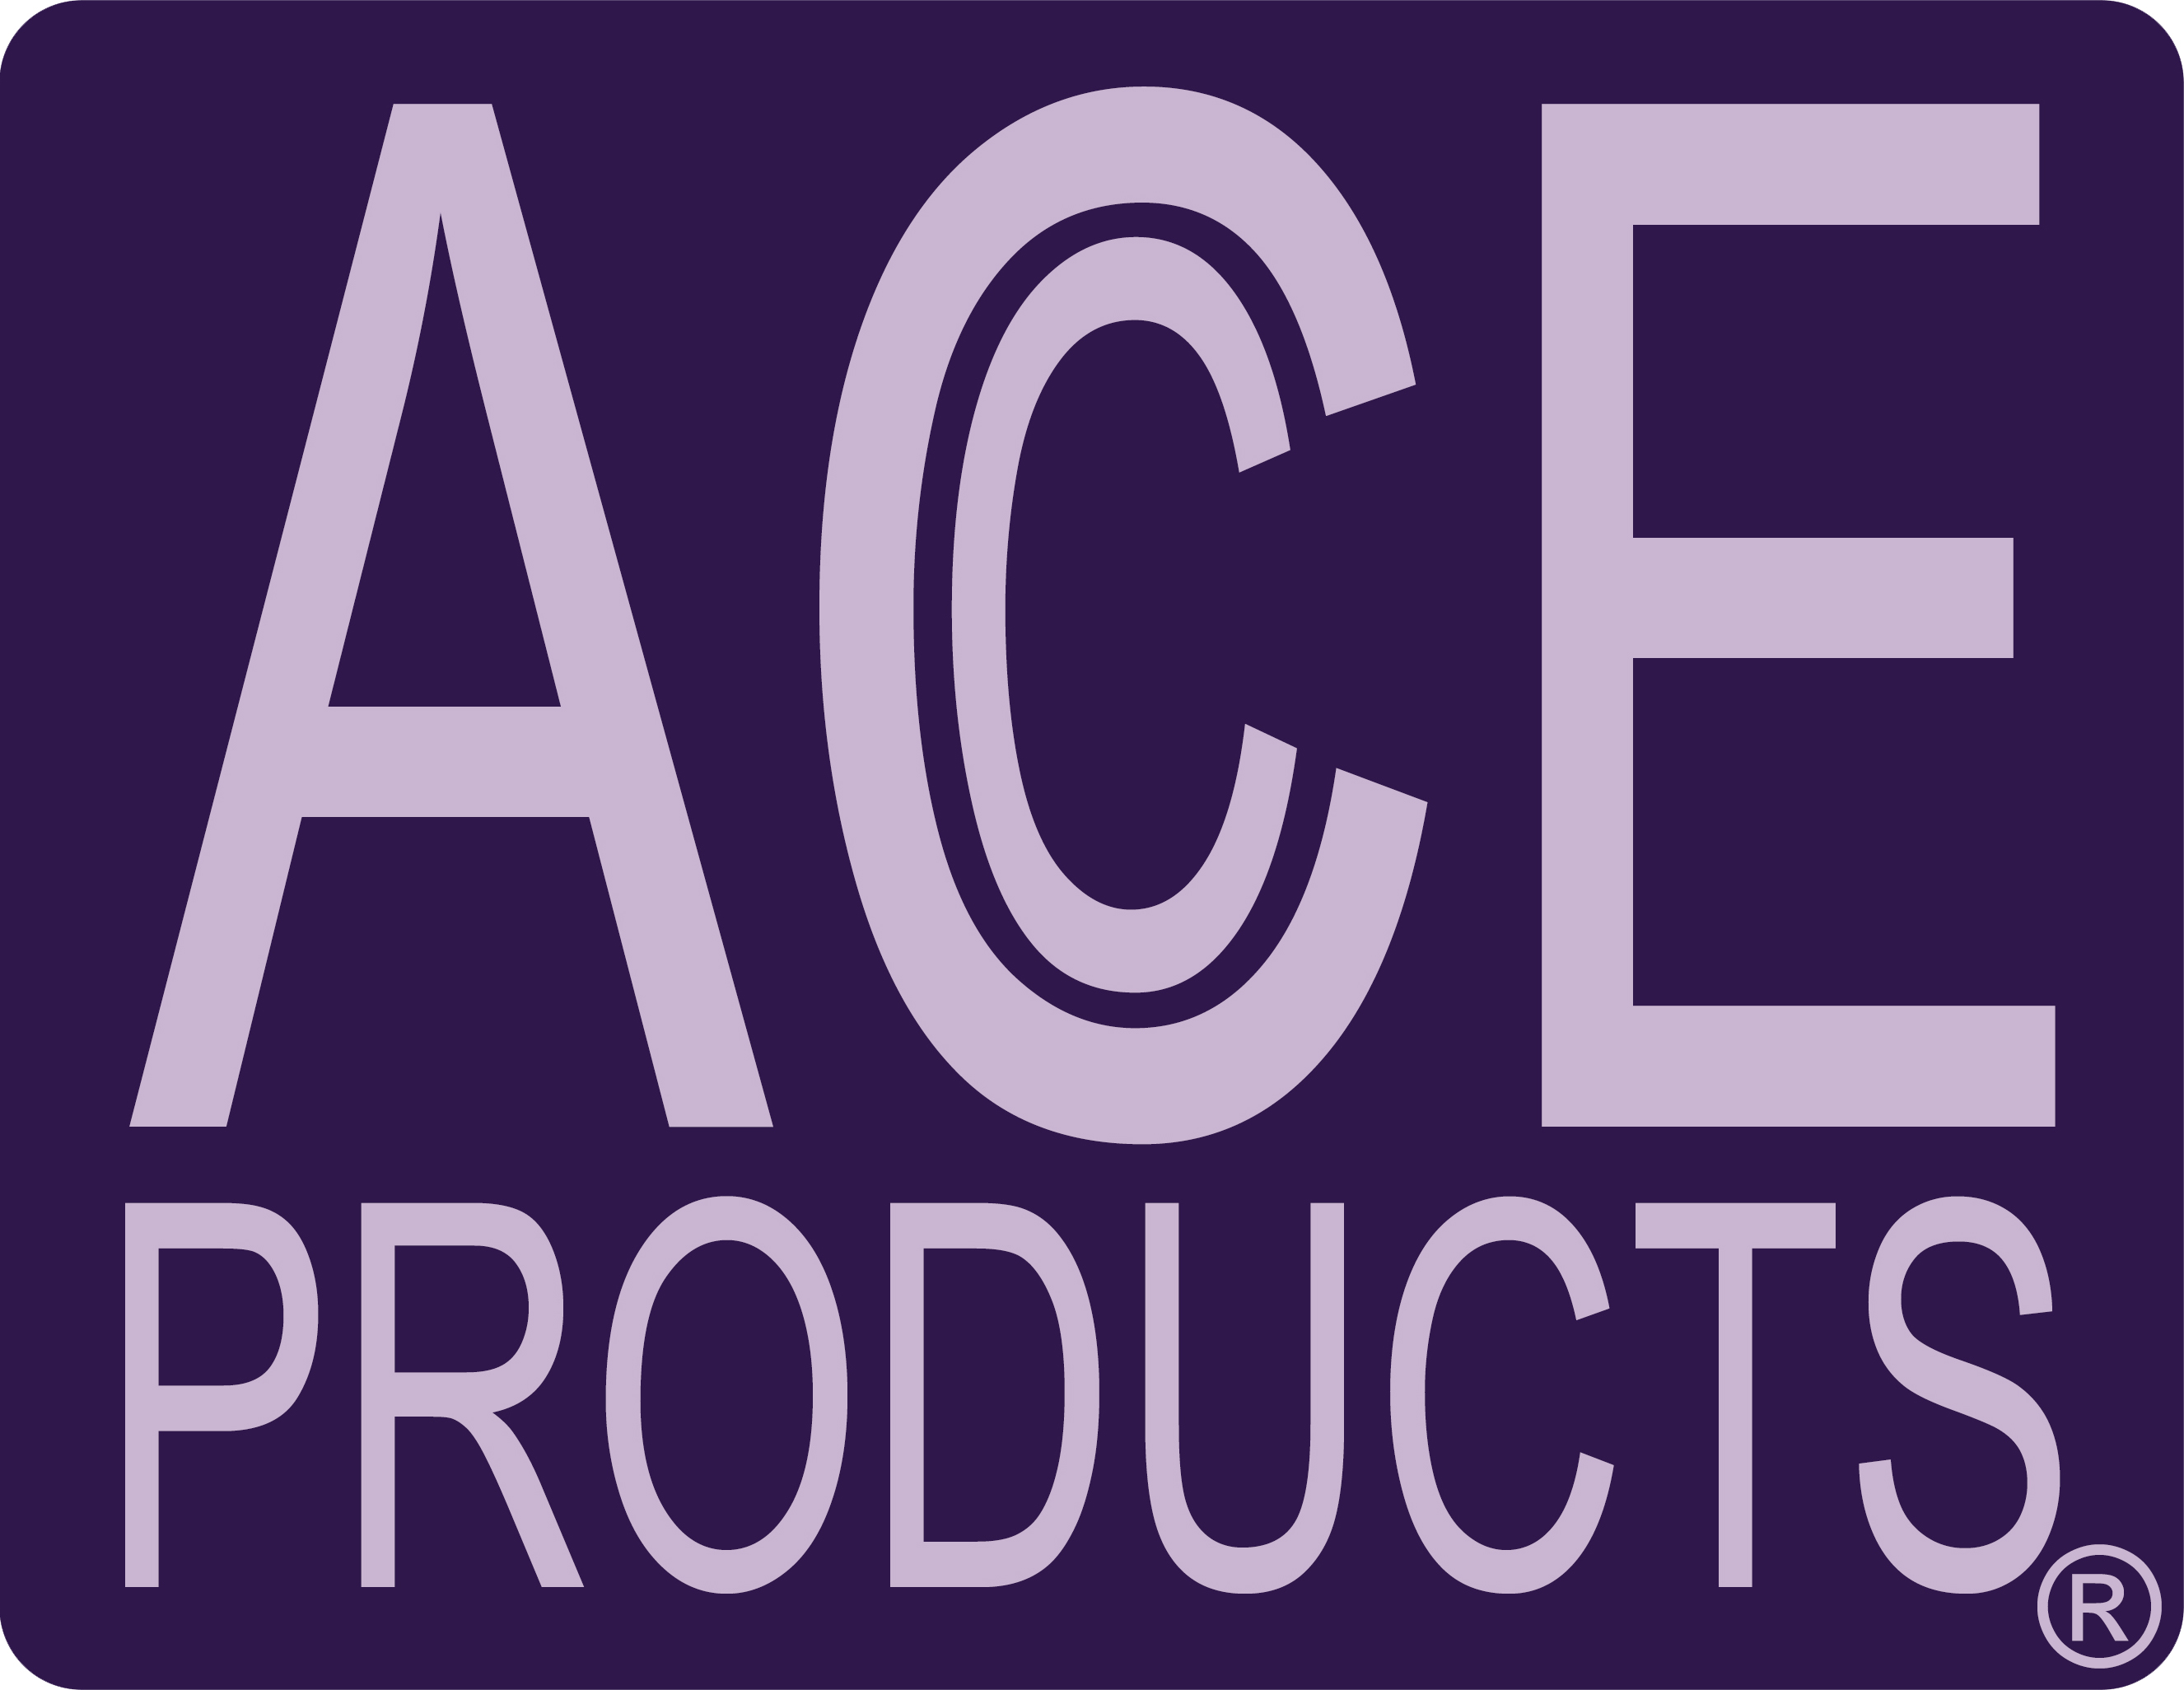 ACCE Products